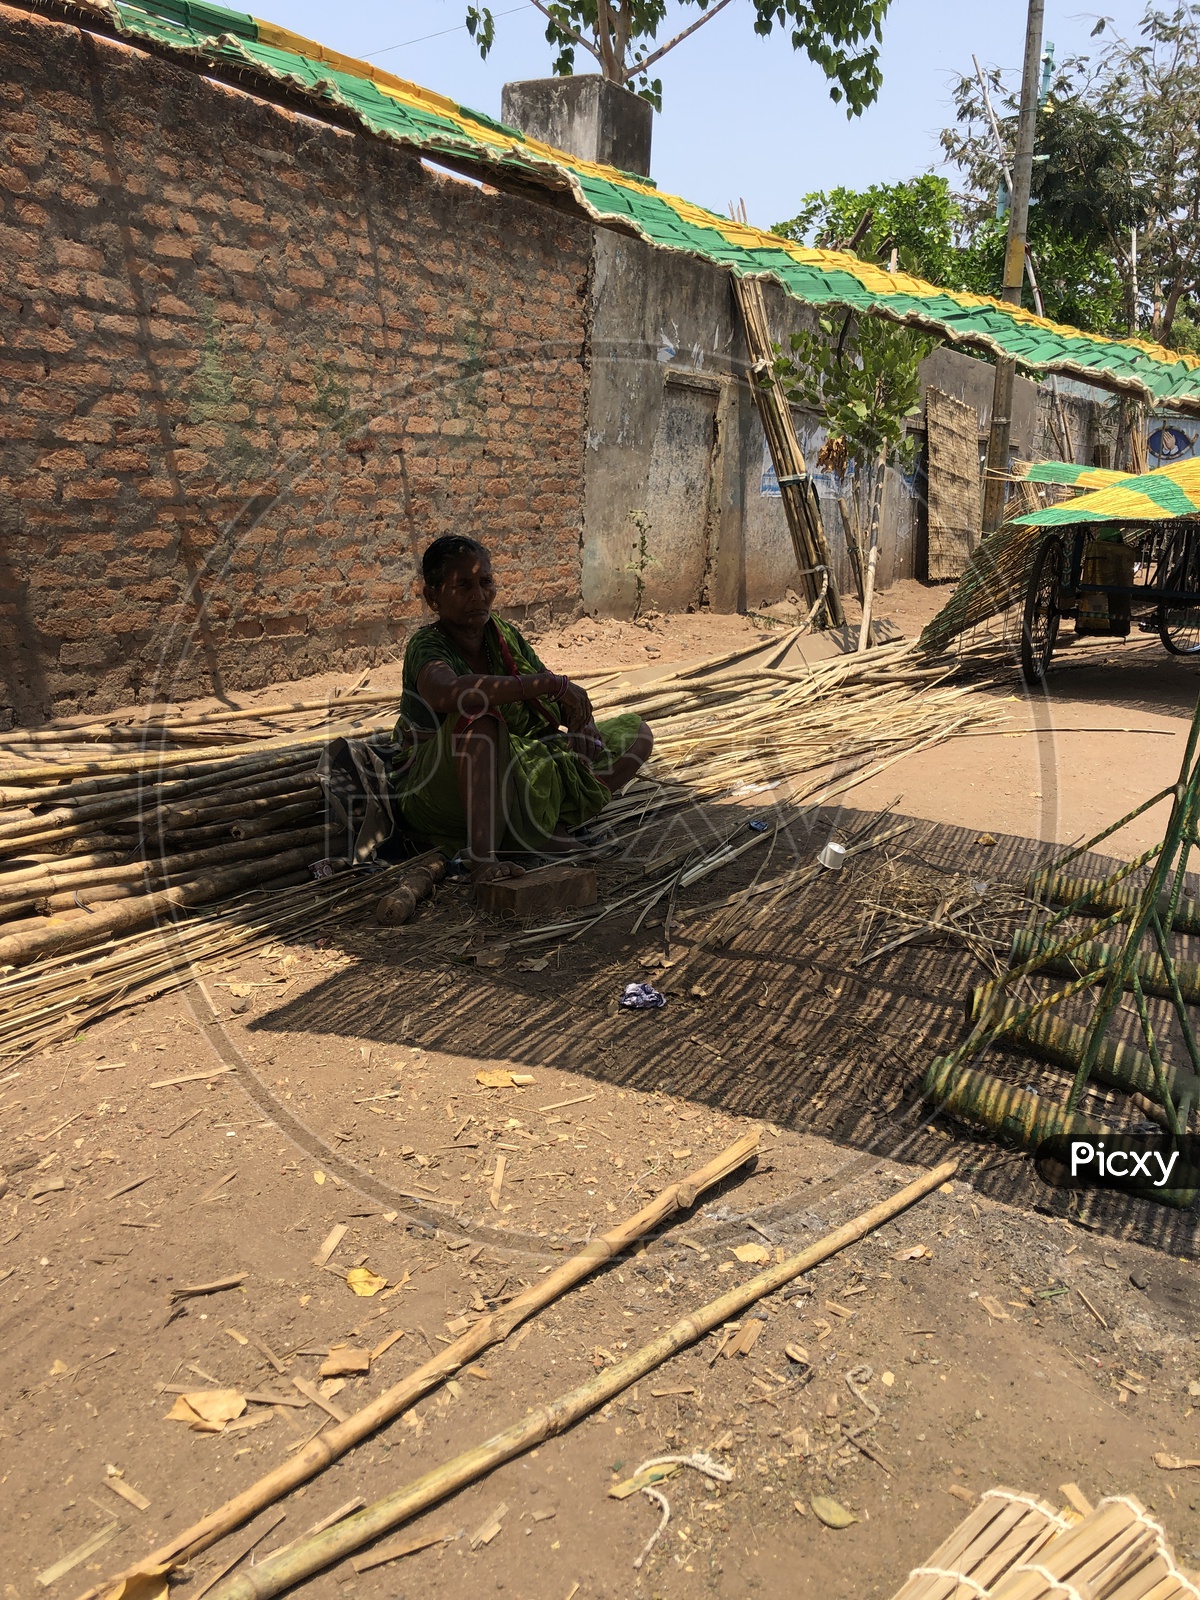 Indian Woman sitting under the bamboo shade